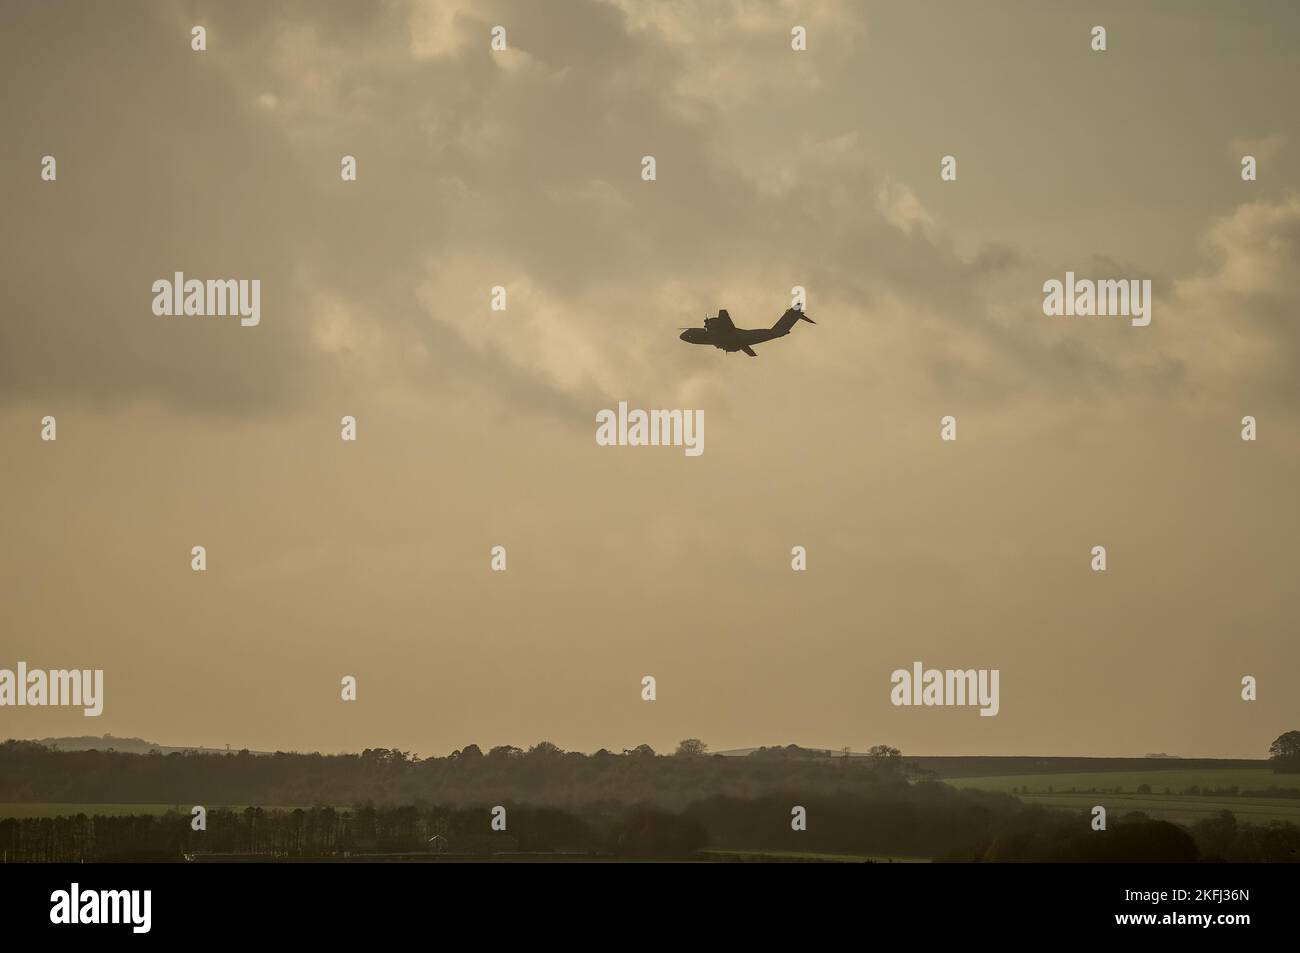 a royal air force Atlas A400M military cargo plane on a parachute drop run in late afternoon setting sun sky Stock Photo